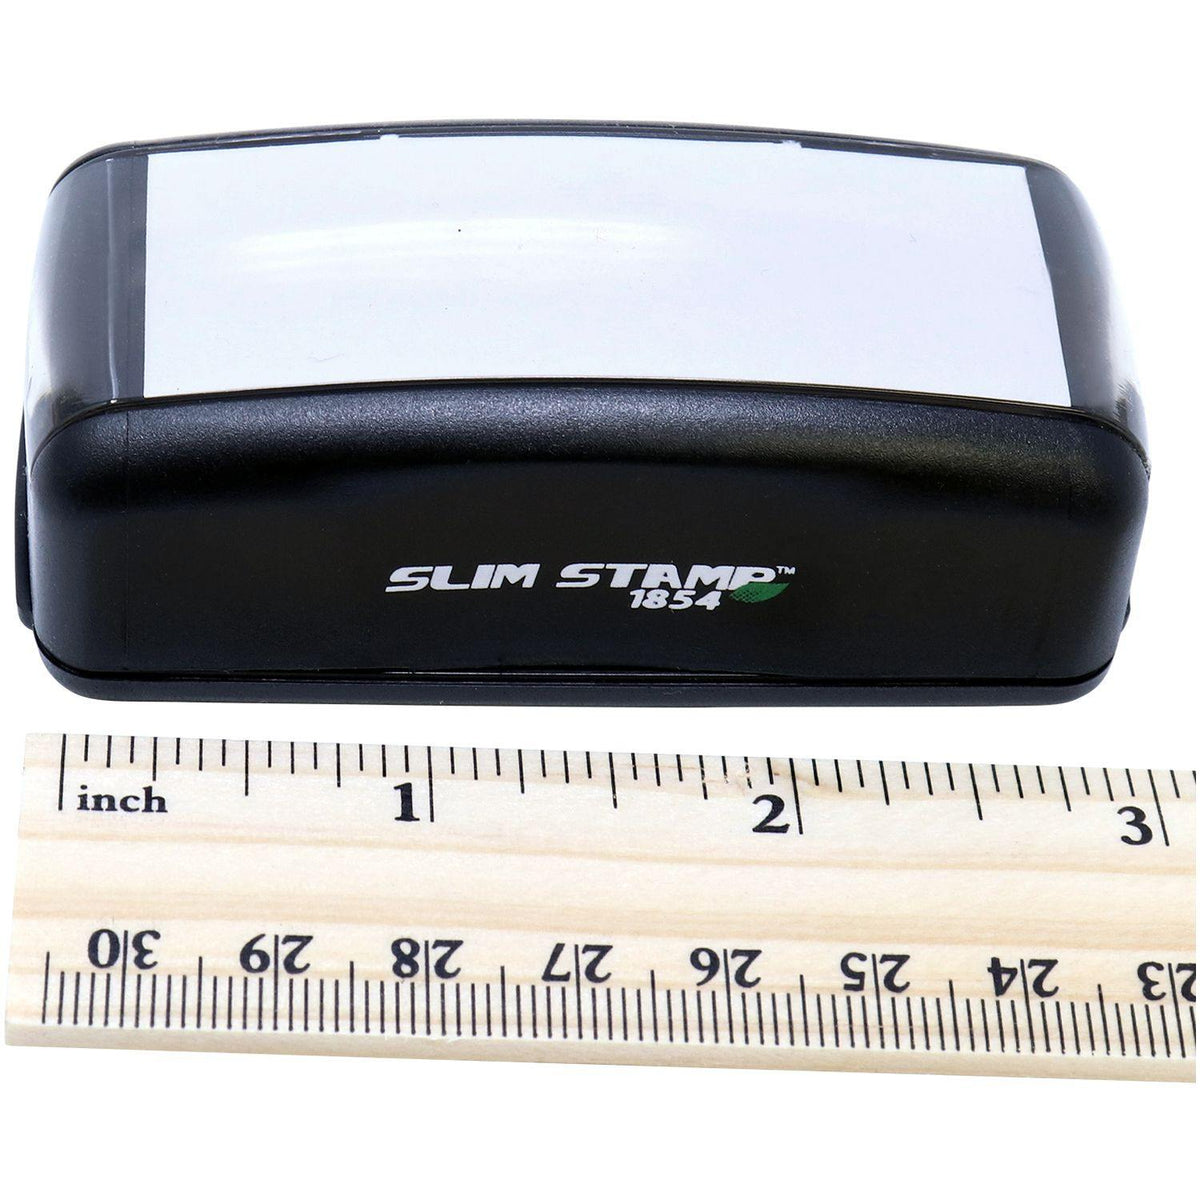 Measurement Large Pre-Inked Unclaimed Stamp with Ruler